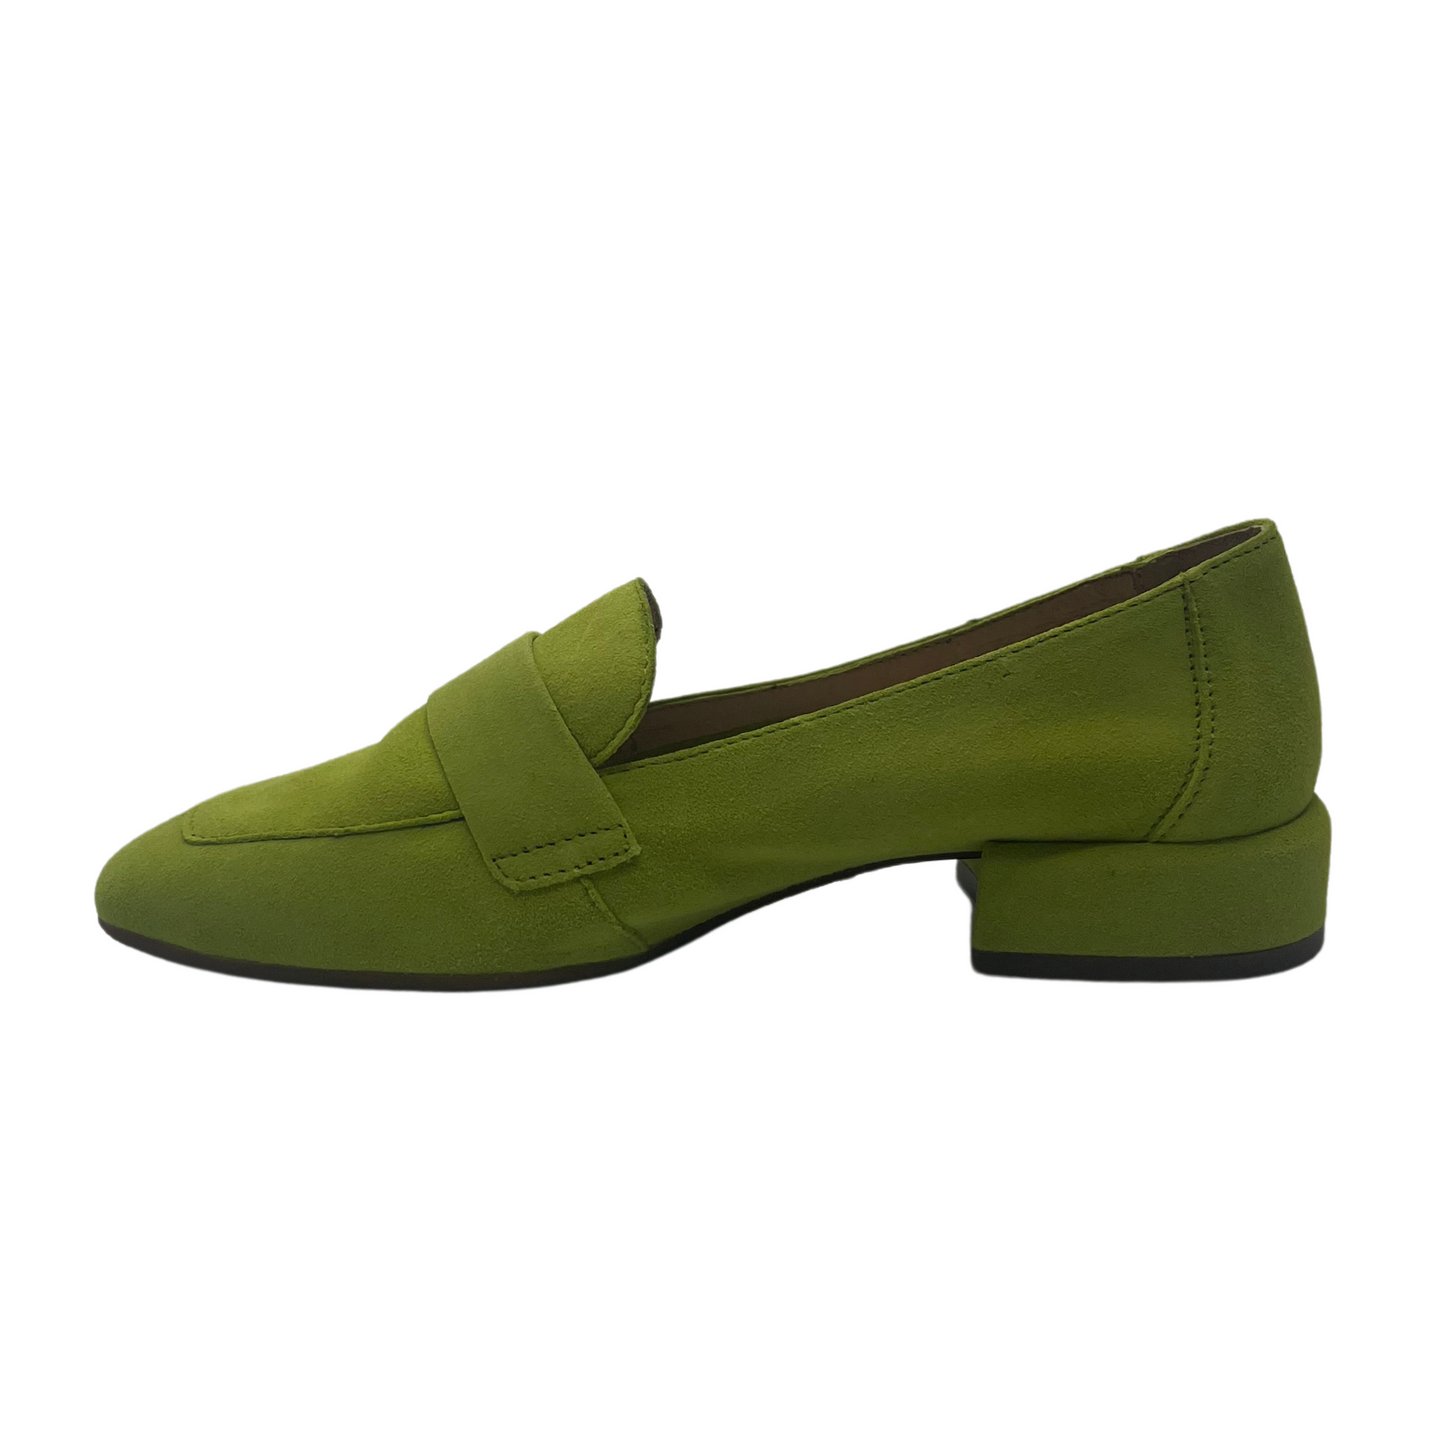 Left facing view of apple green suede leather loafer with short block heel